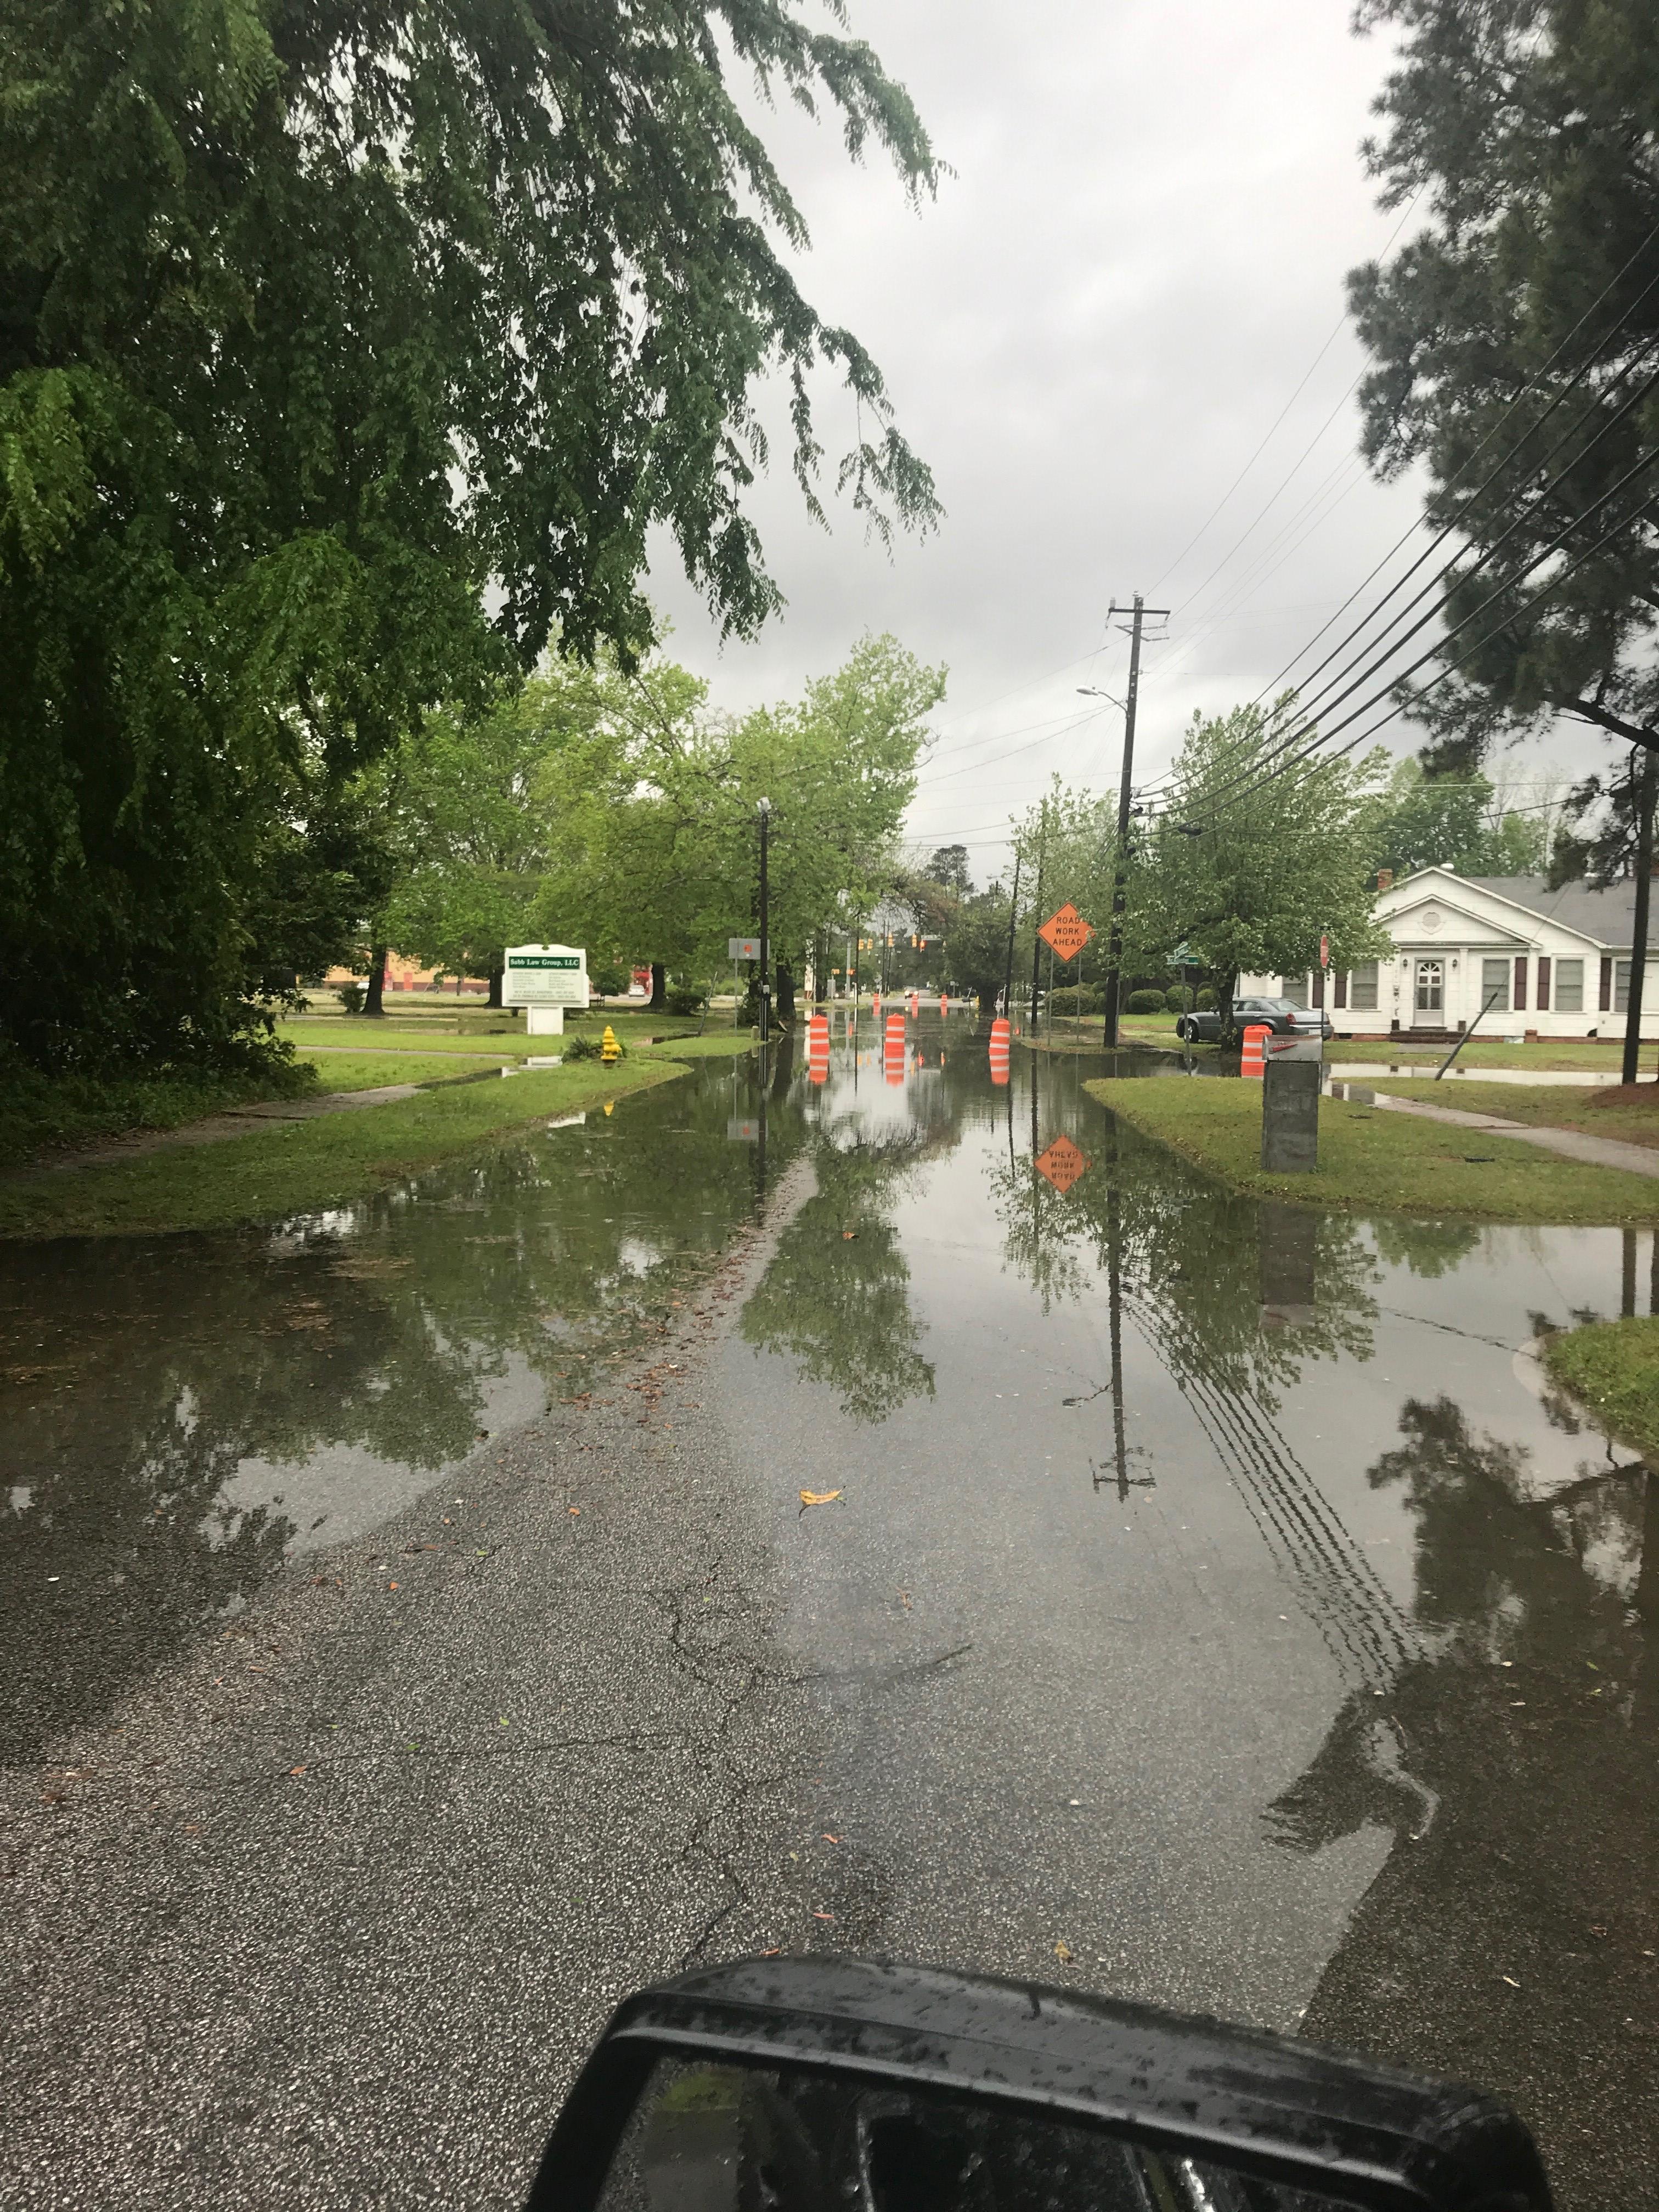 Lake City Police ask people to avoid roads closed because of flooding, downed trees | WPDE